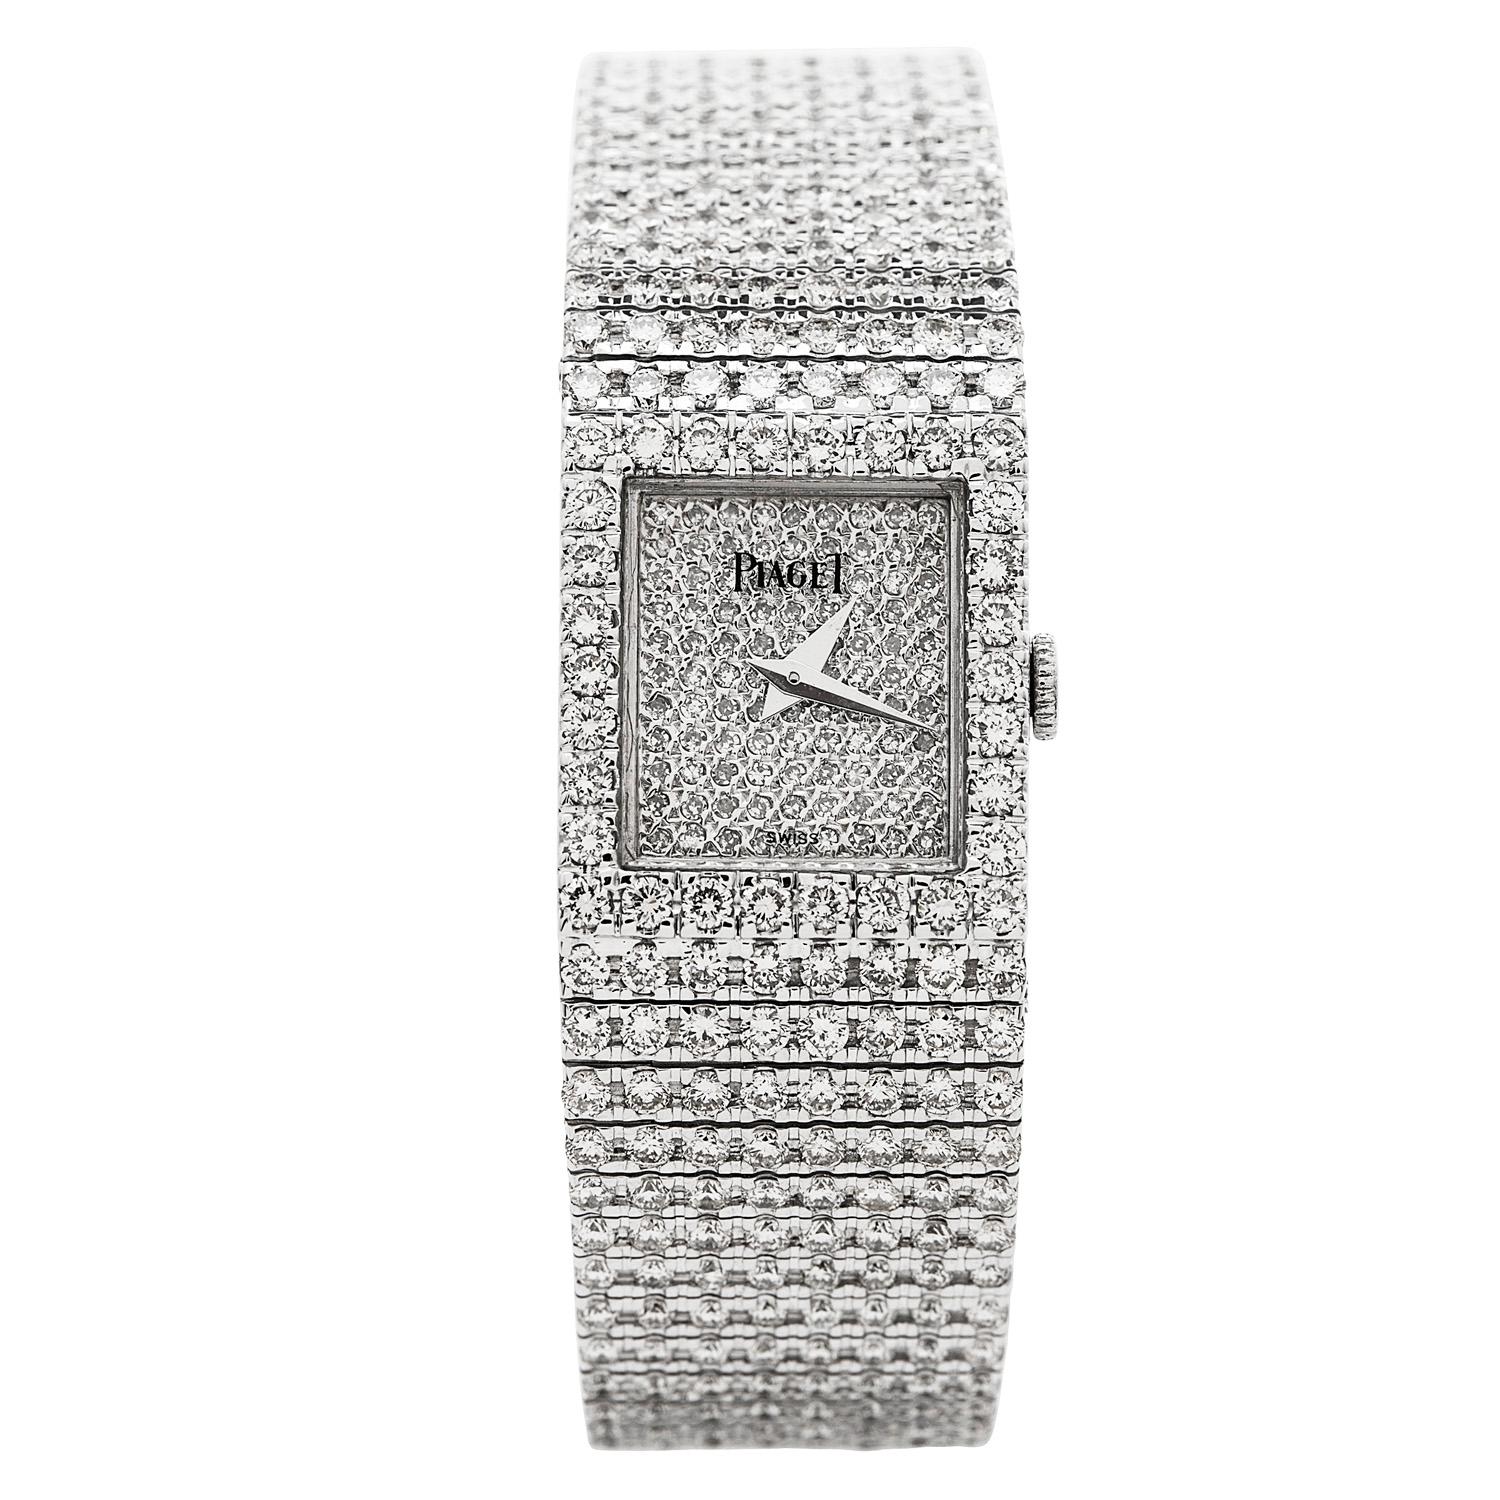 This Pristine Condition preowned 21st century Piaget POLO all diamond watch is the perfect glamour piece. 
Crafted in pure 74.5 grams of 18K White Gold. Featuring all original factory-set diamonds,  dial with 110 round brilliant cut diamonds, 36 